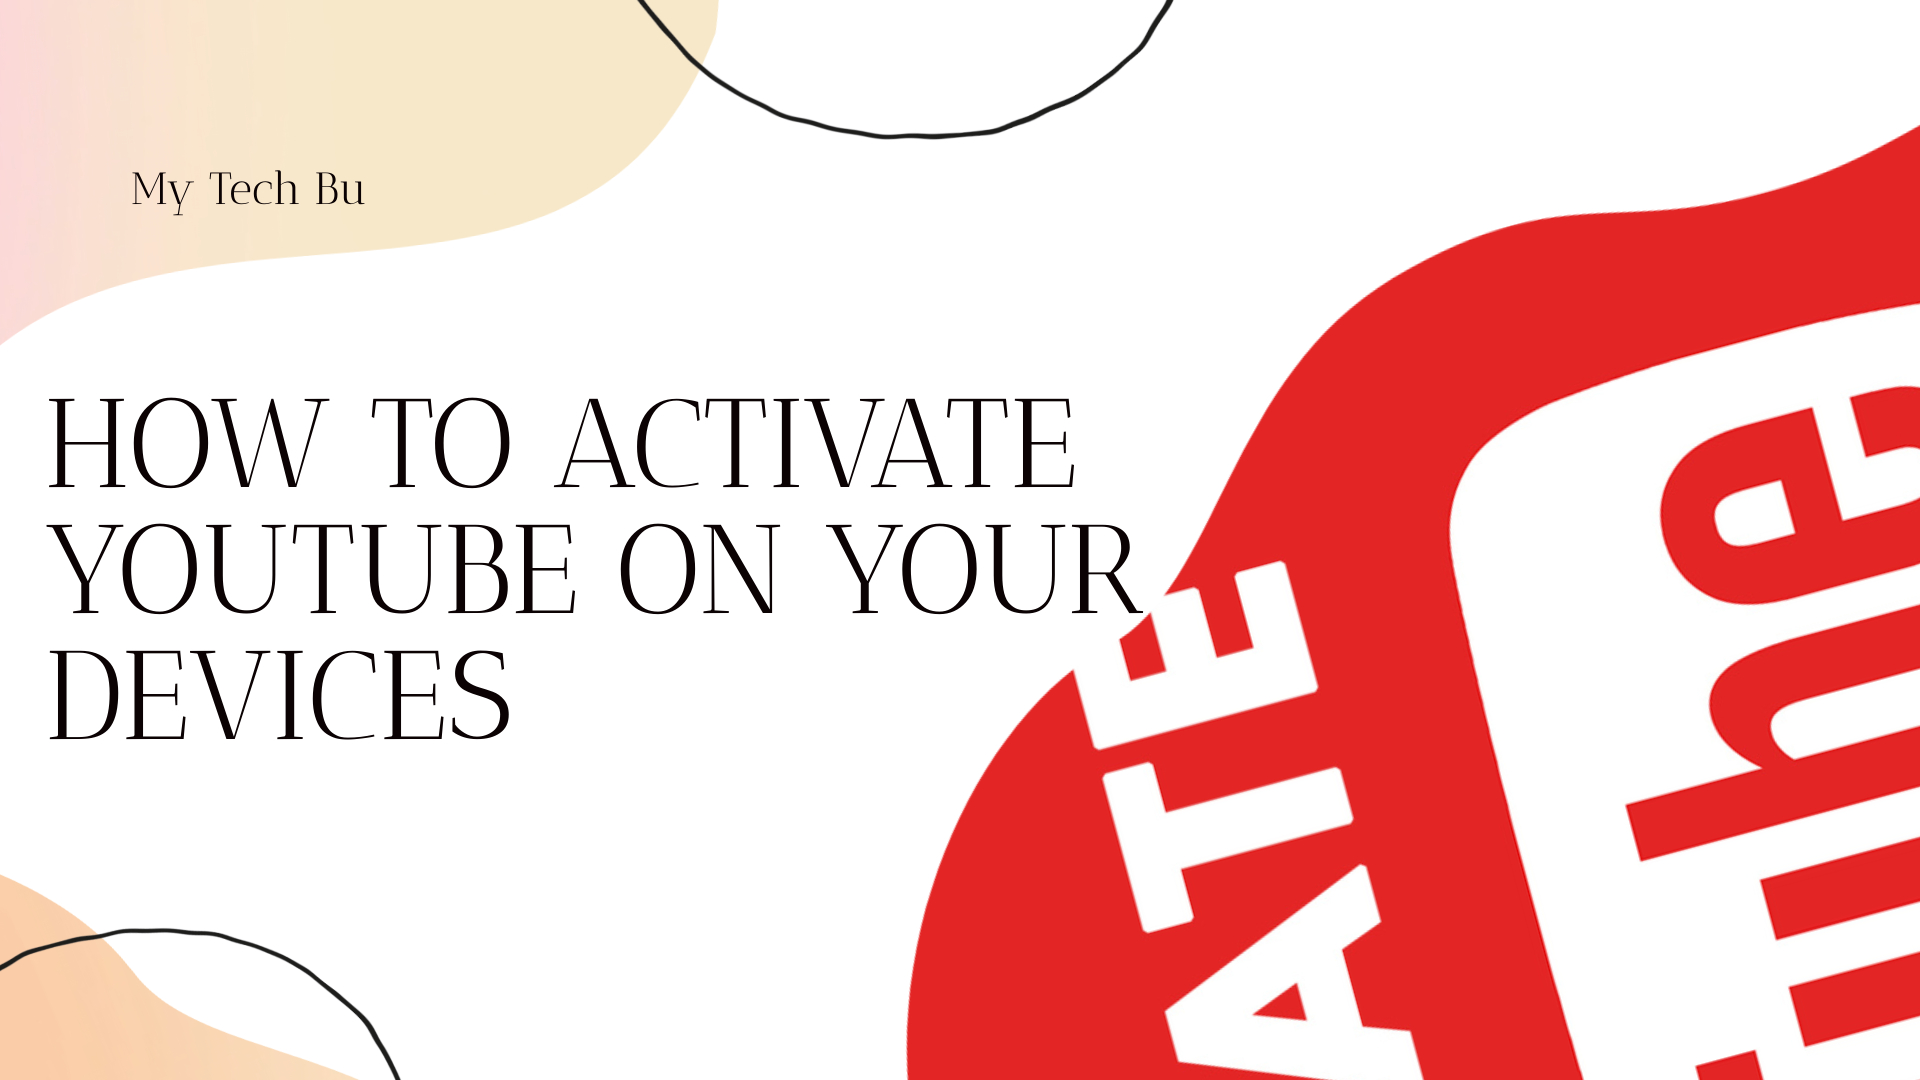 How to Activate YouTube on Your Devices: A Step-by-Step Guide